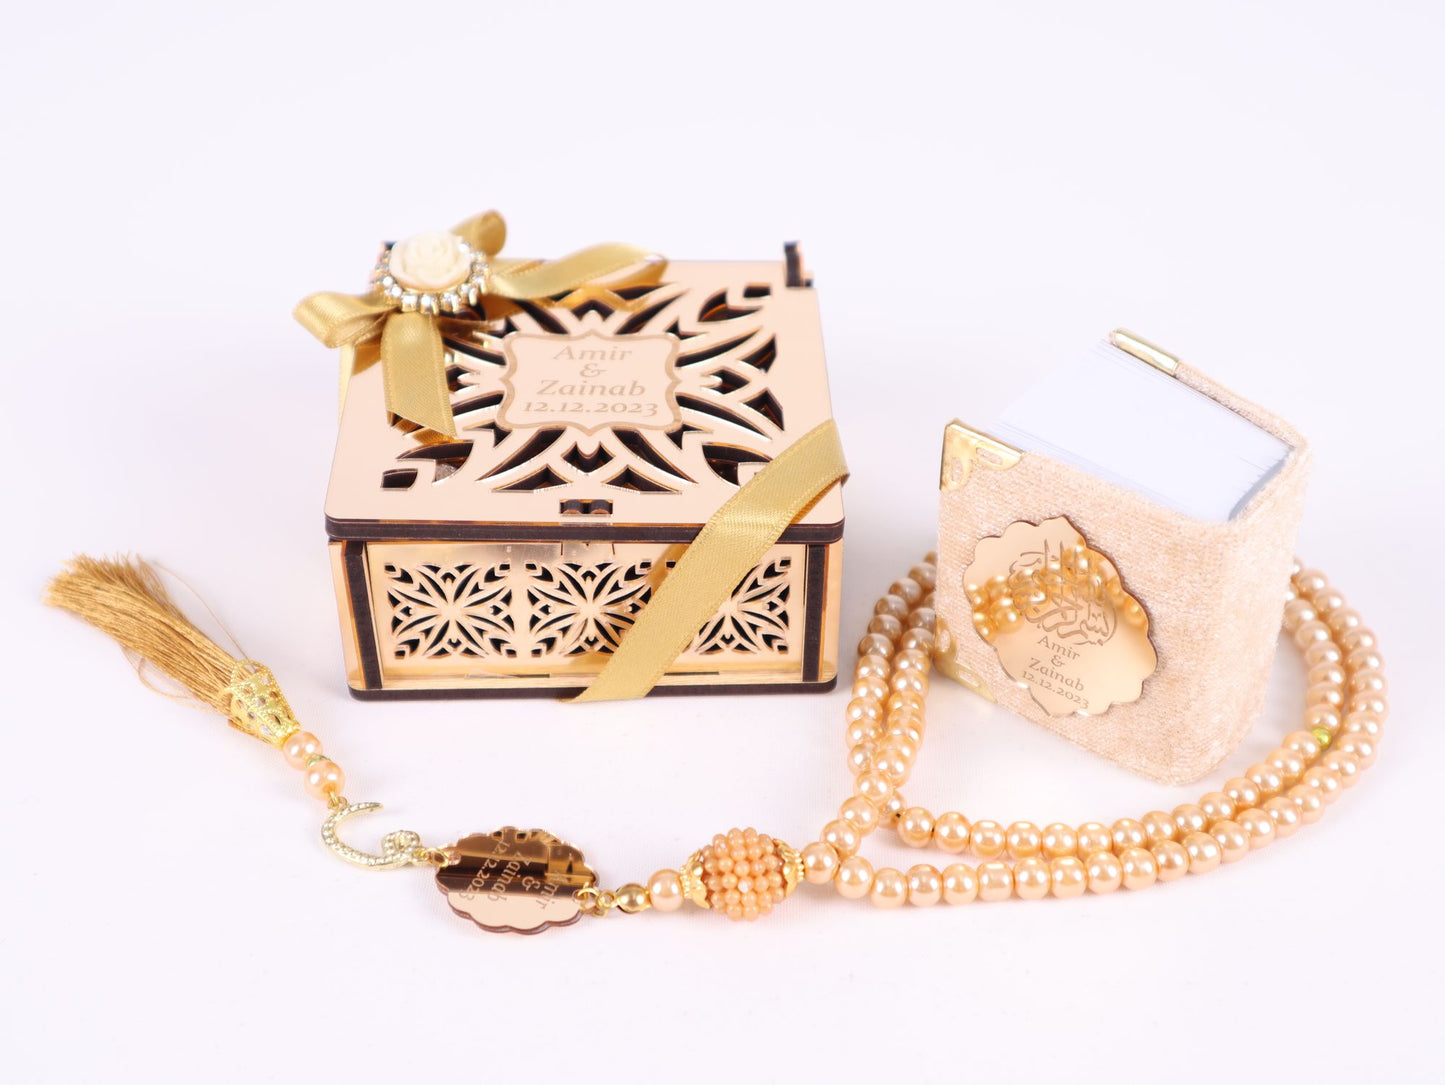 Personalized Mini Quran Prayer Beads Wooden Box with Gold Acrylic Set - Islamic Elite Favors is a handmade gift shop offering a wide variety of unique and personalized gifts for all occasions. Whether you're looking for the perfect Ramadan, Eid, Hajj, wedding gift or something special for a birthday, baby shower or anniversary, we have something for everyone. High quality, made with love.